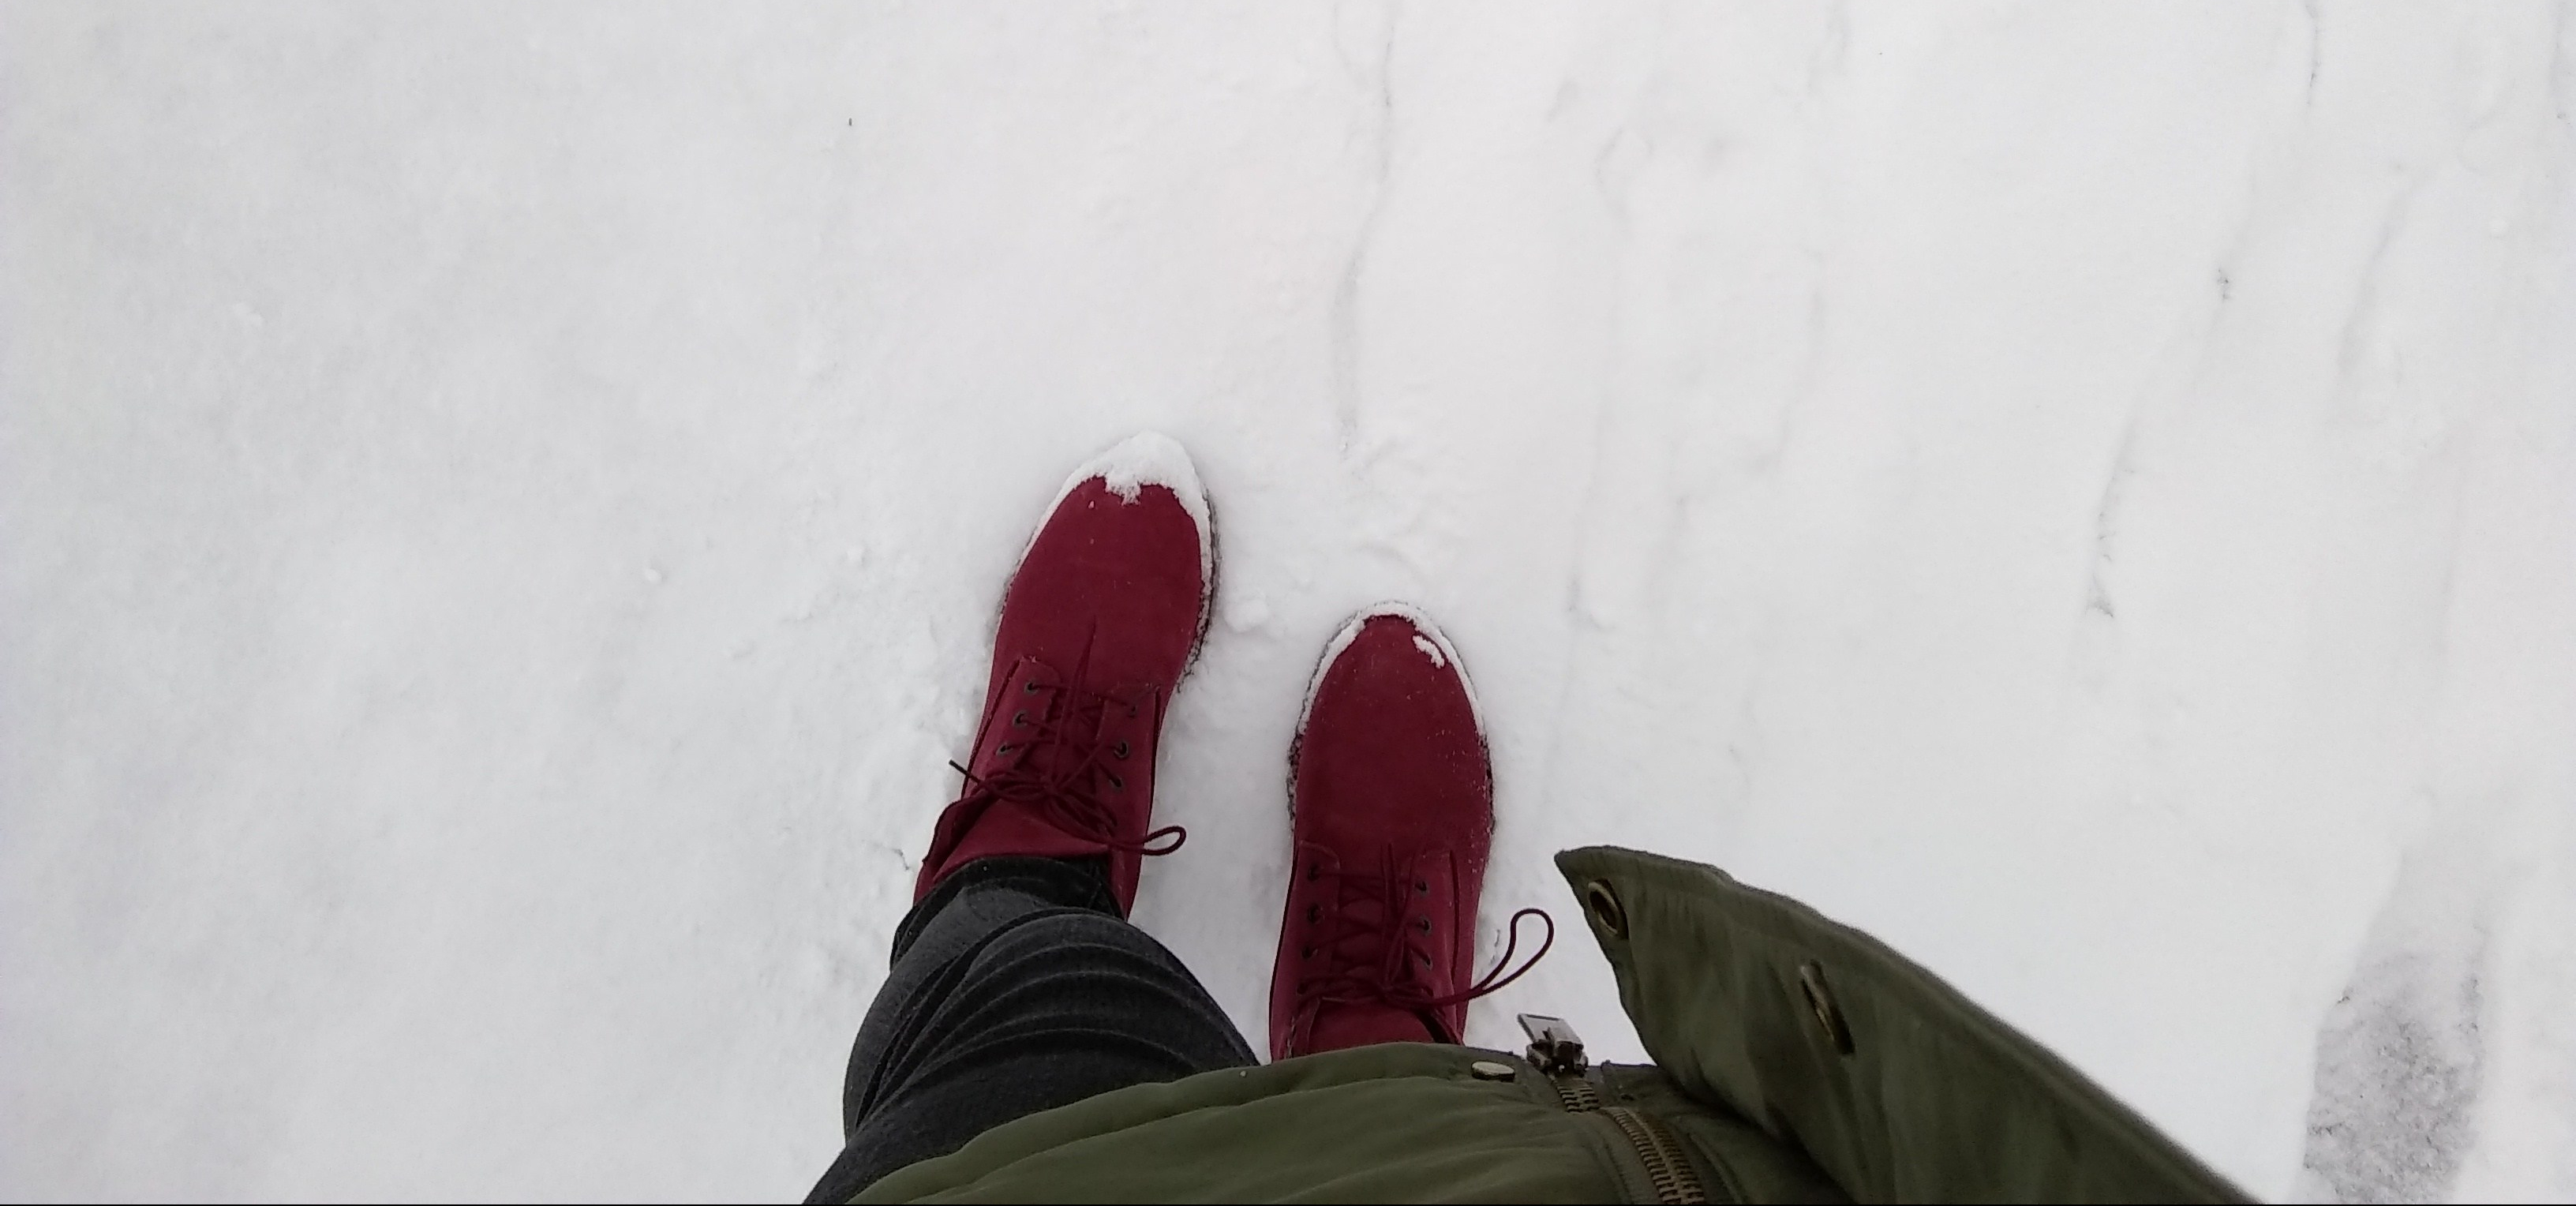 Walking on snow with boots.